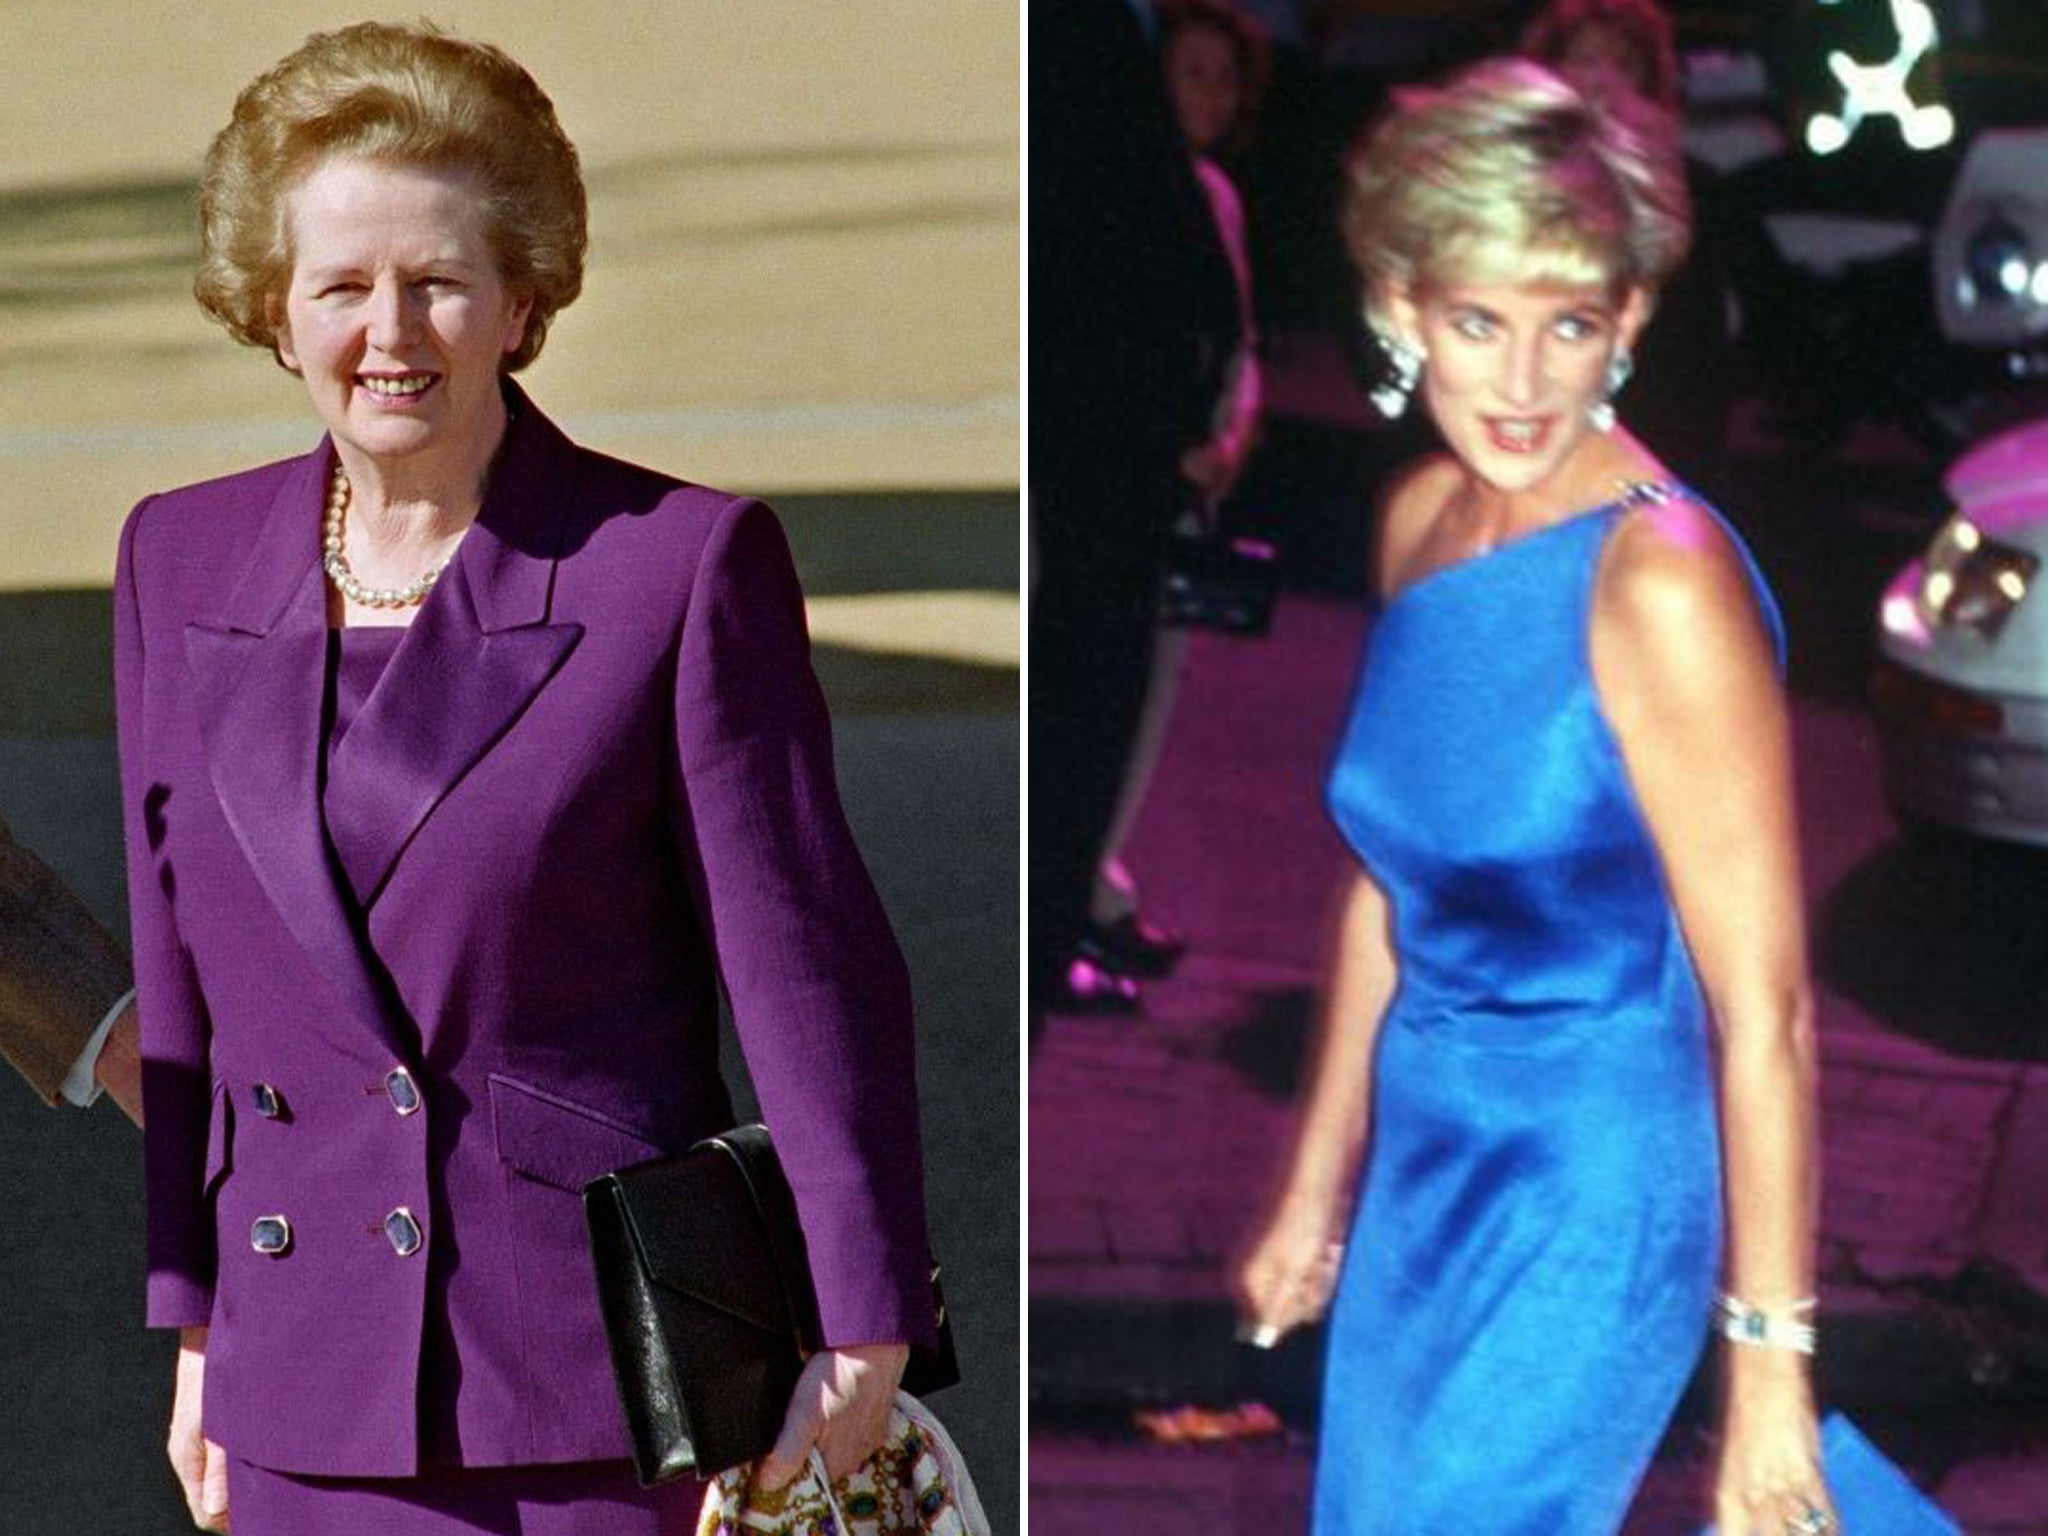 The Sun has suggested that Thatcher’s ceremony will be ‘just like Diana’